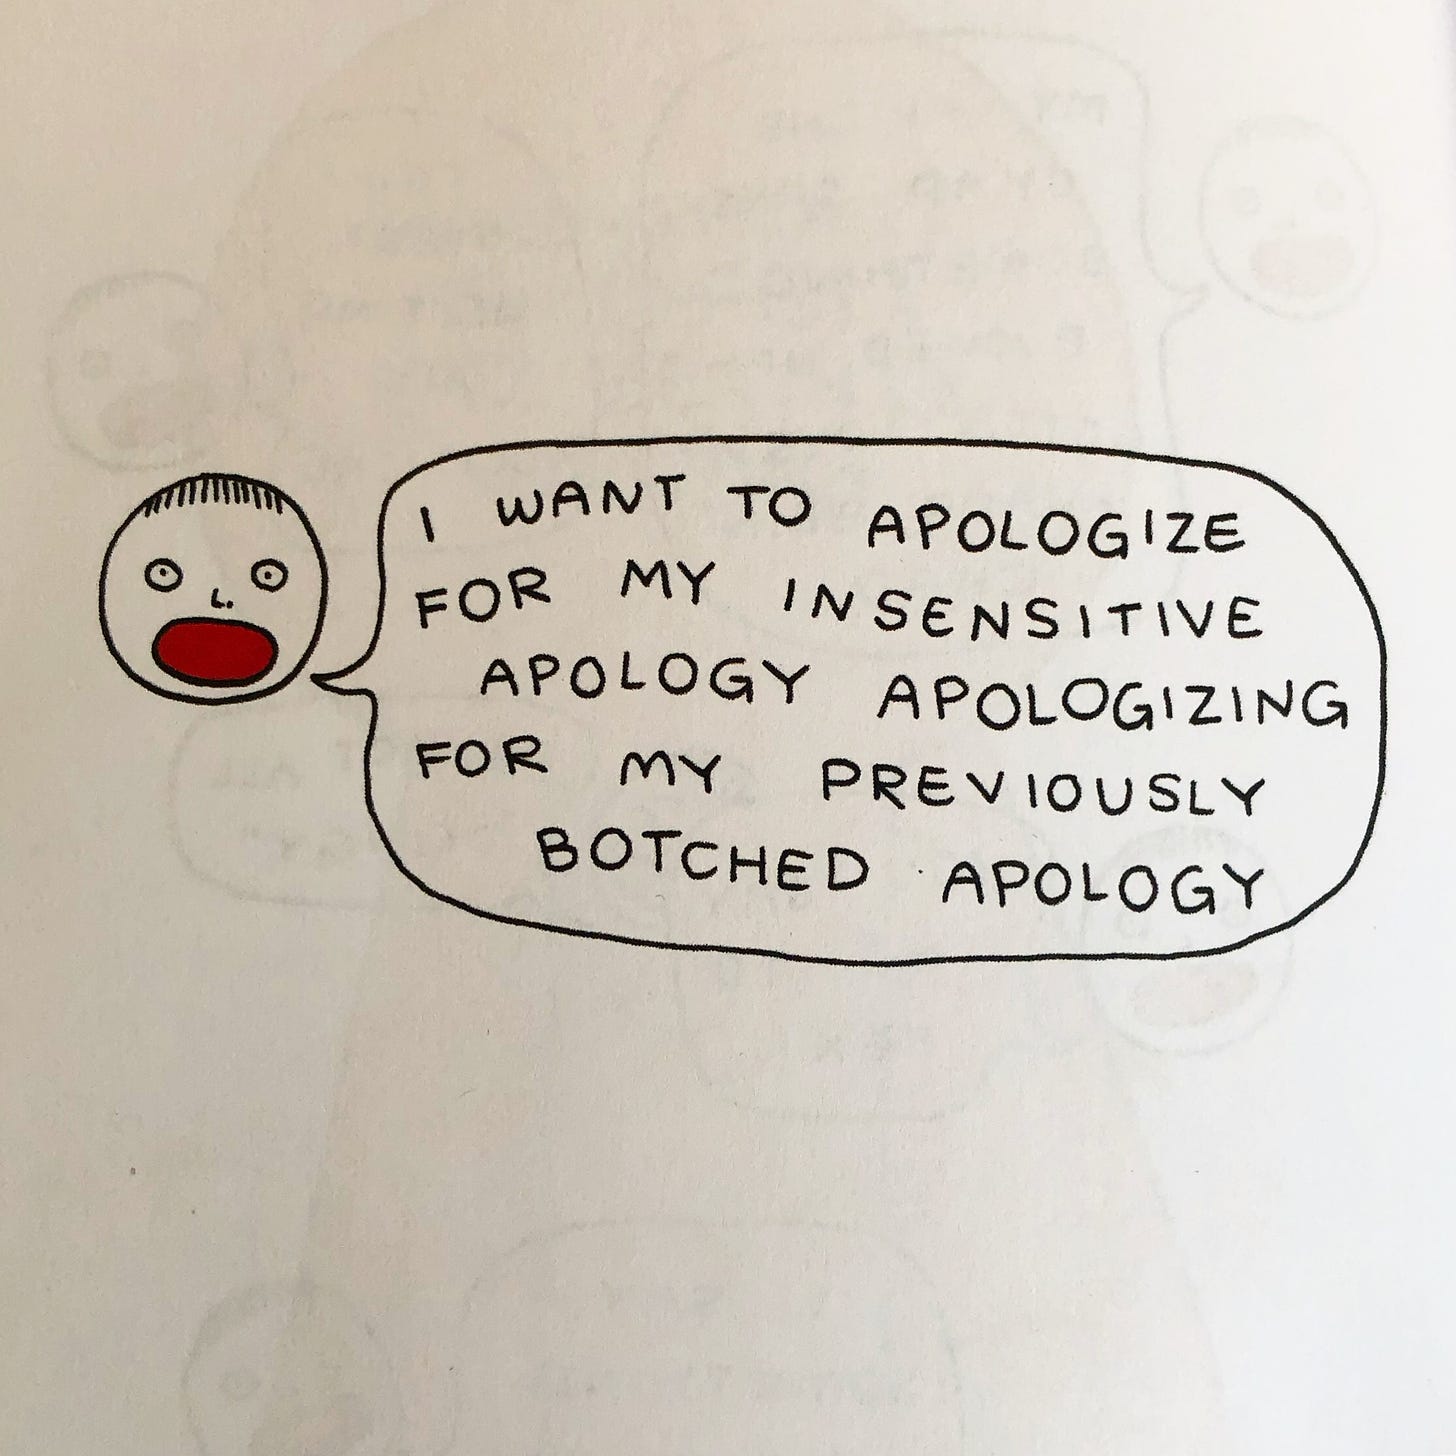 ID: a good boy face with speech bubble that reads "I want to apologize for my insensitive apology apologizing for my previously botched apology" 